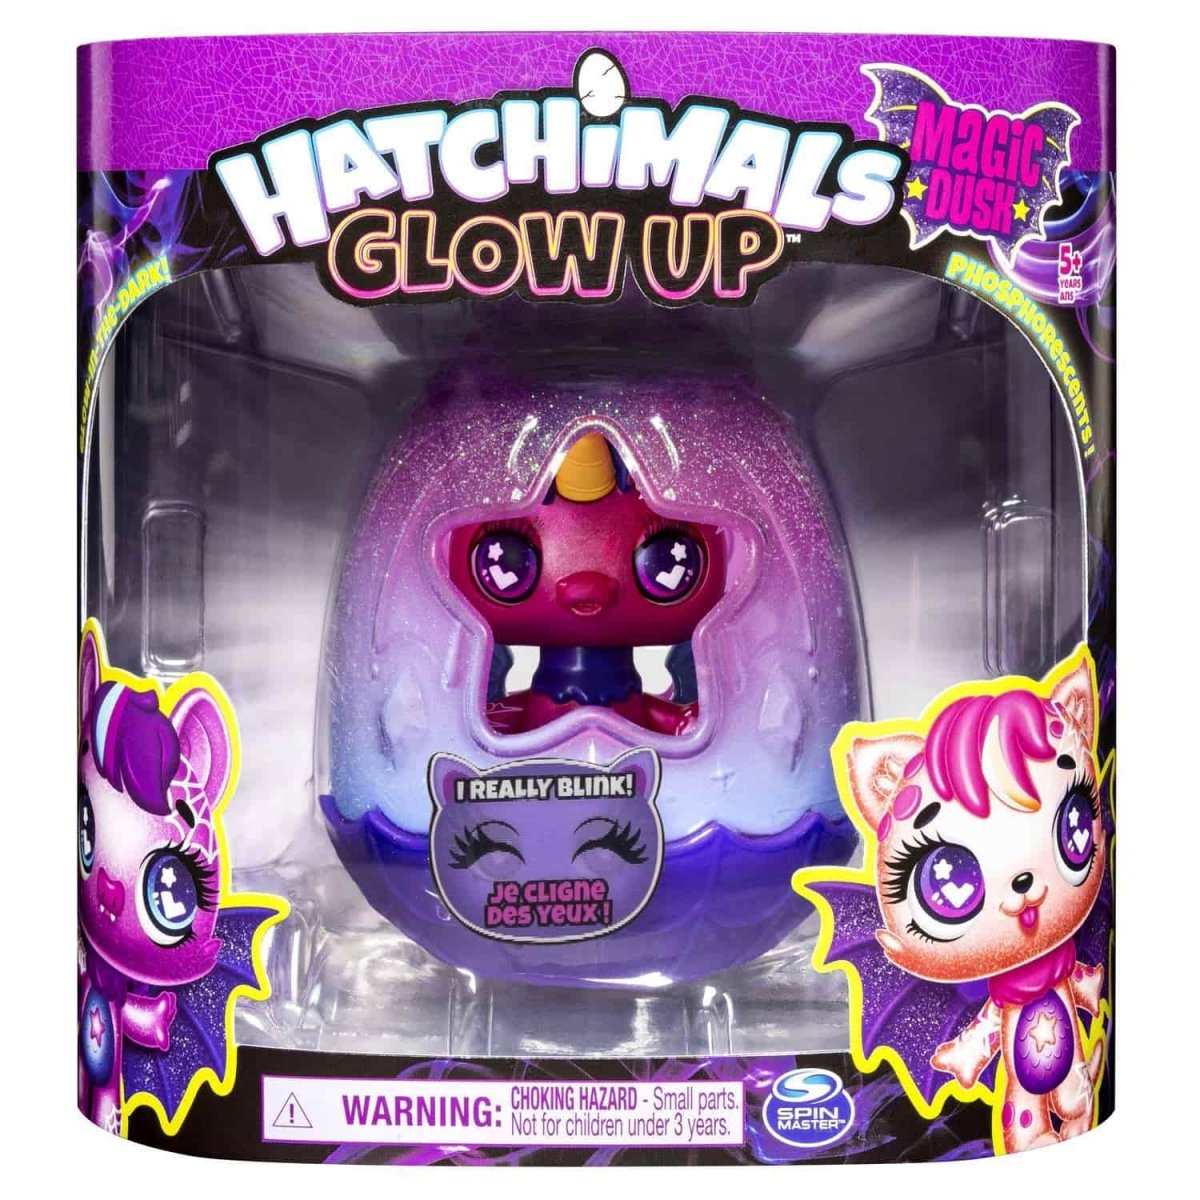 2 Hatchimals Glow up Blinking Collectible Dolls Magic Dusk Age 5 for sale online 